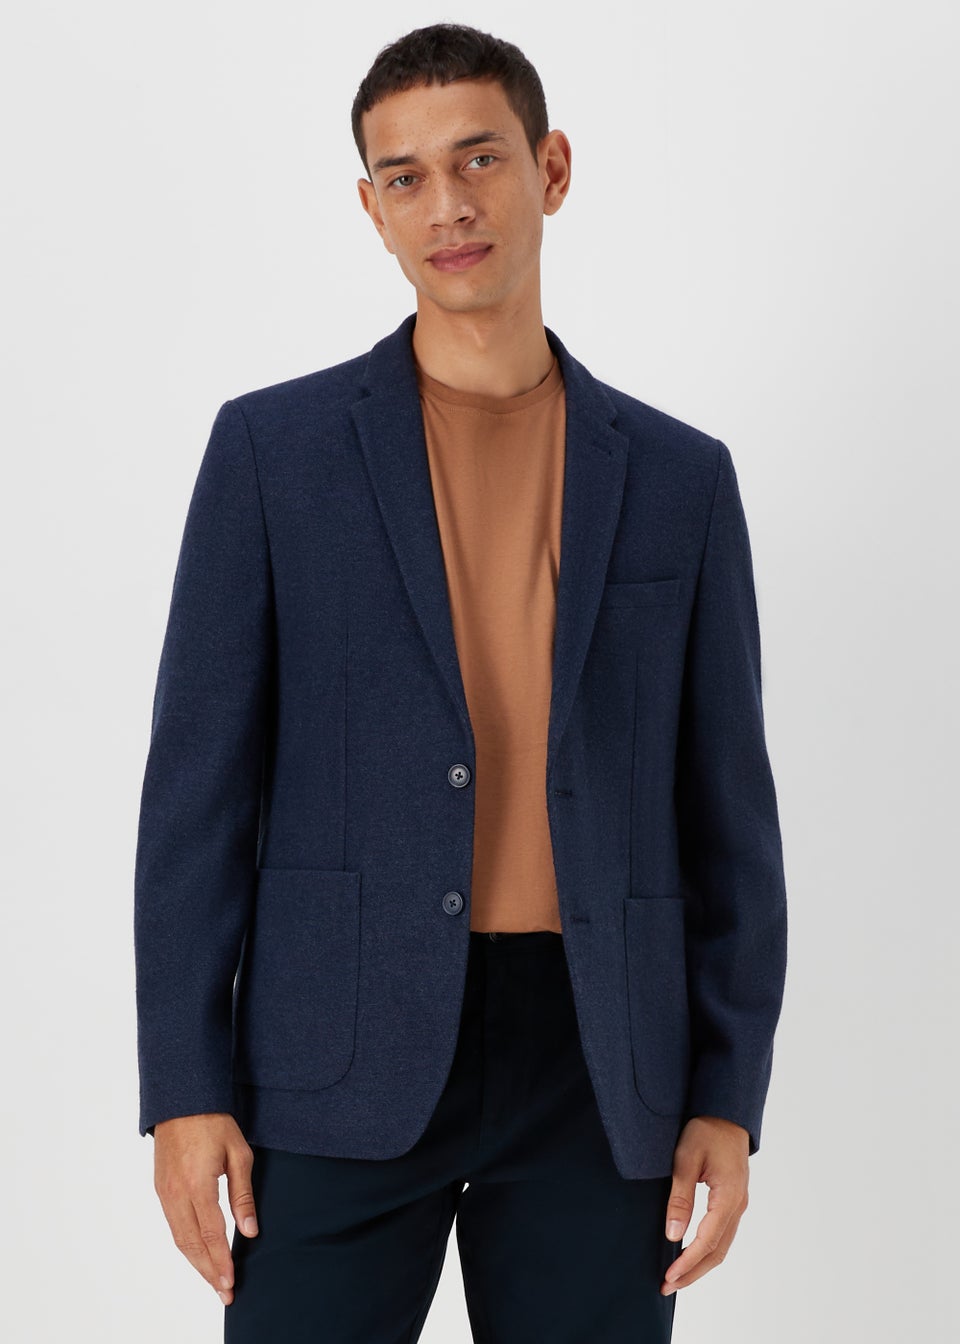 Taylor & Wright Donegal Navy Slim Fit Blazer